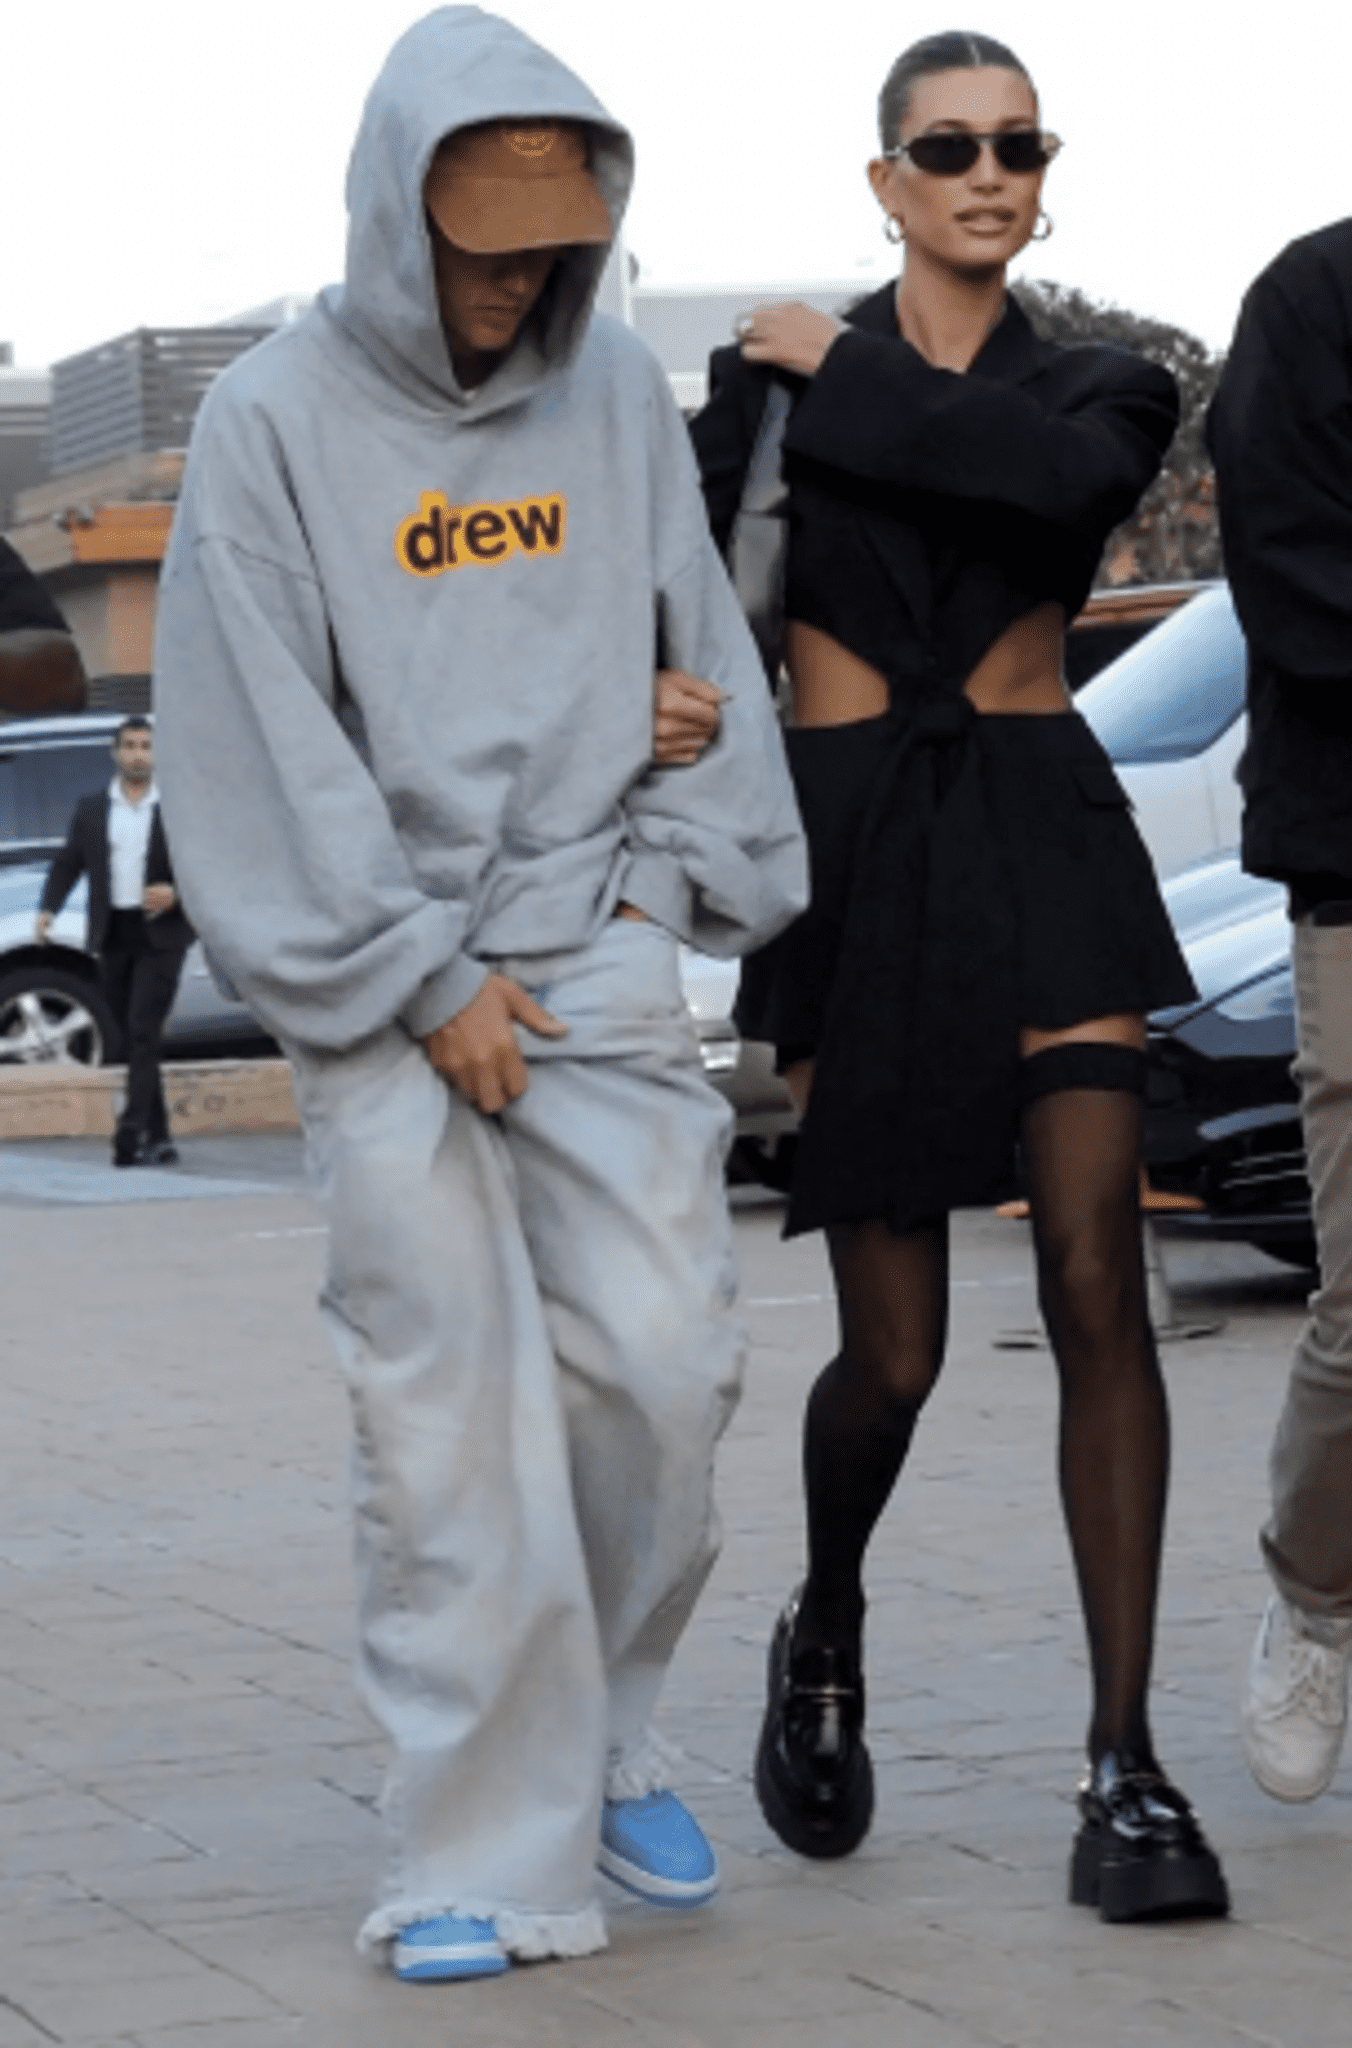 In Starkly Different Looks, Justin Bieber And Hailey Bieber Promoted Kendall Jenner's 818 Tequila Line